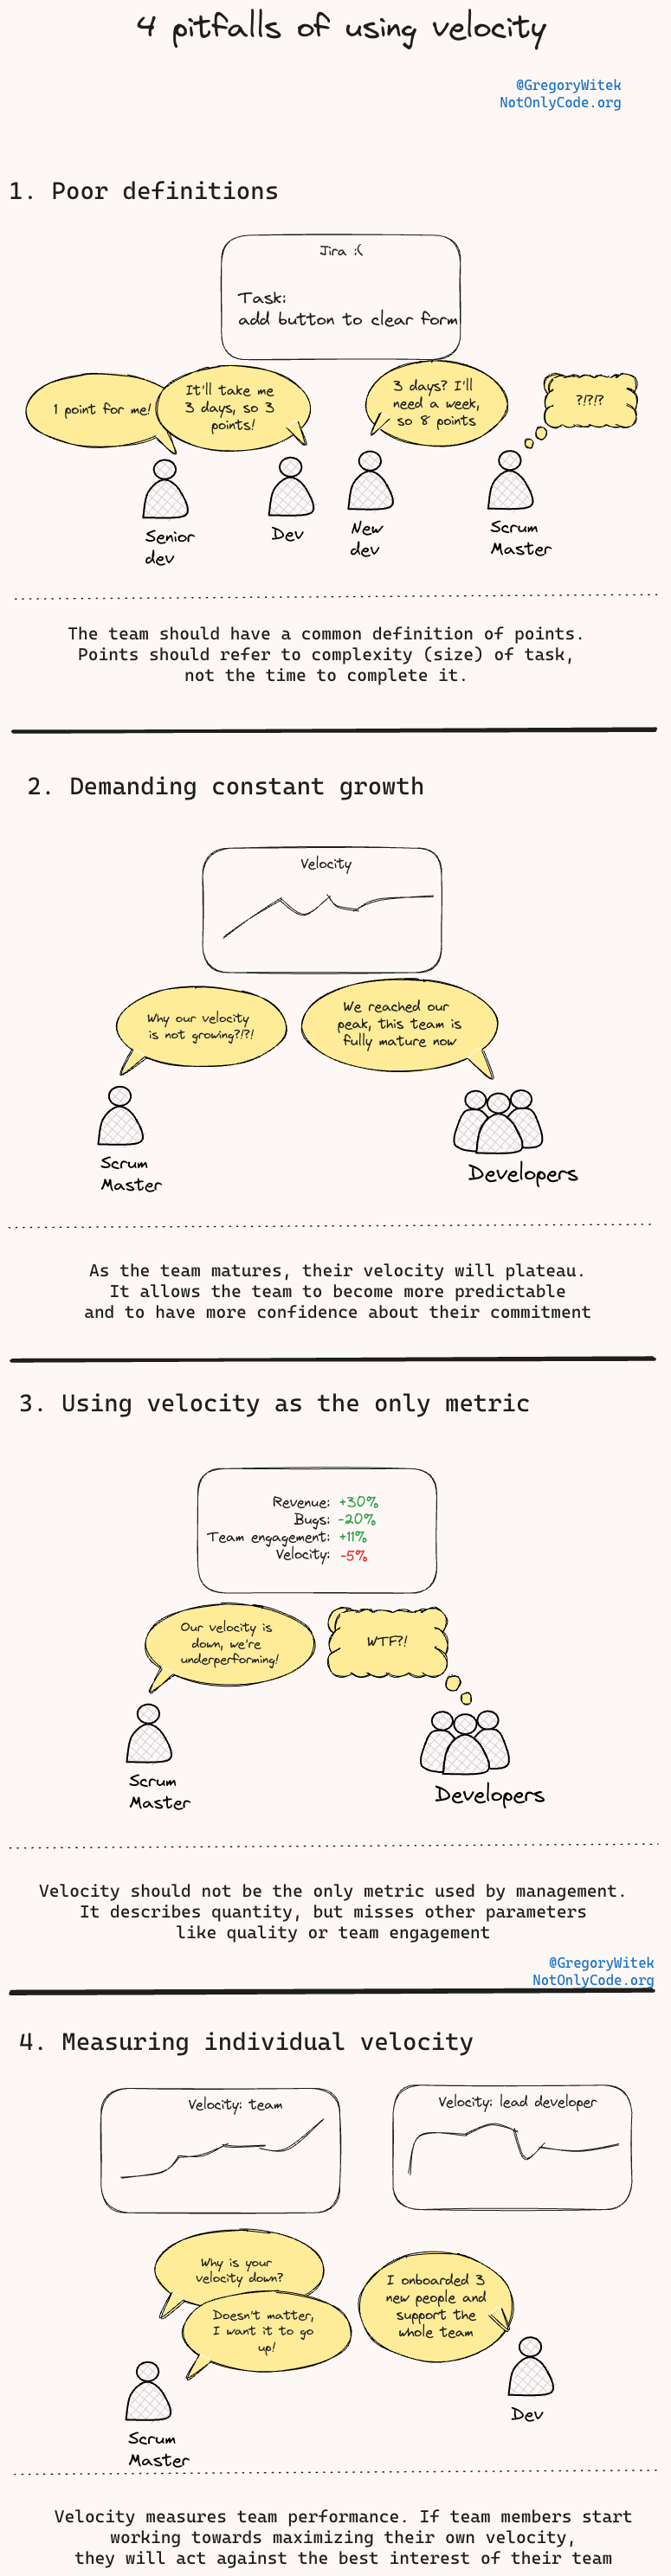 The problem with velocity